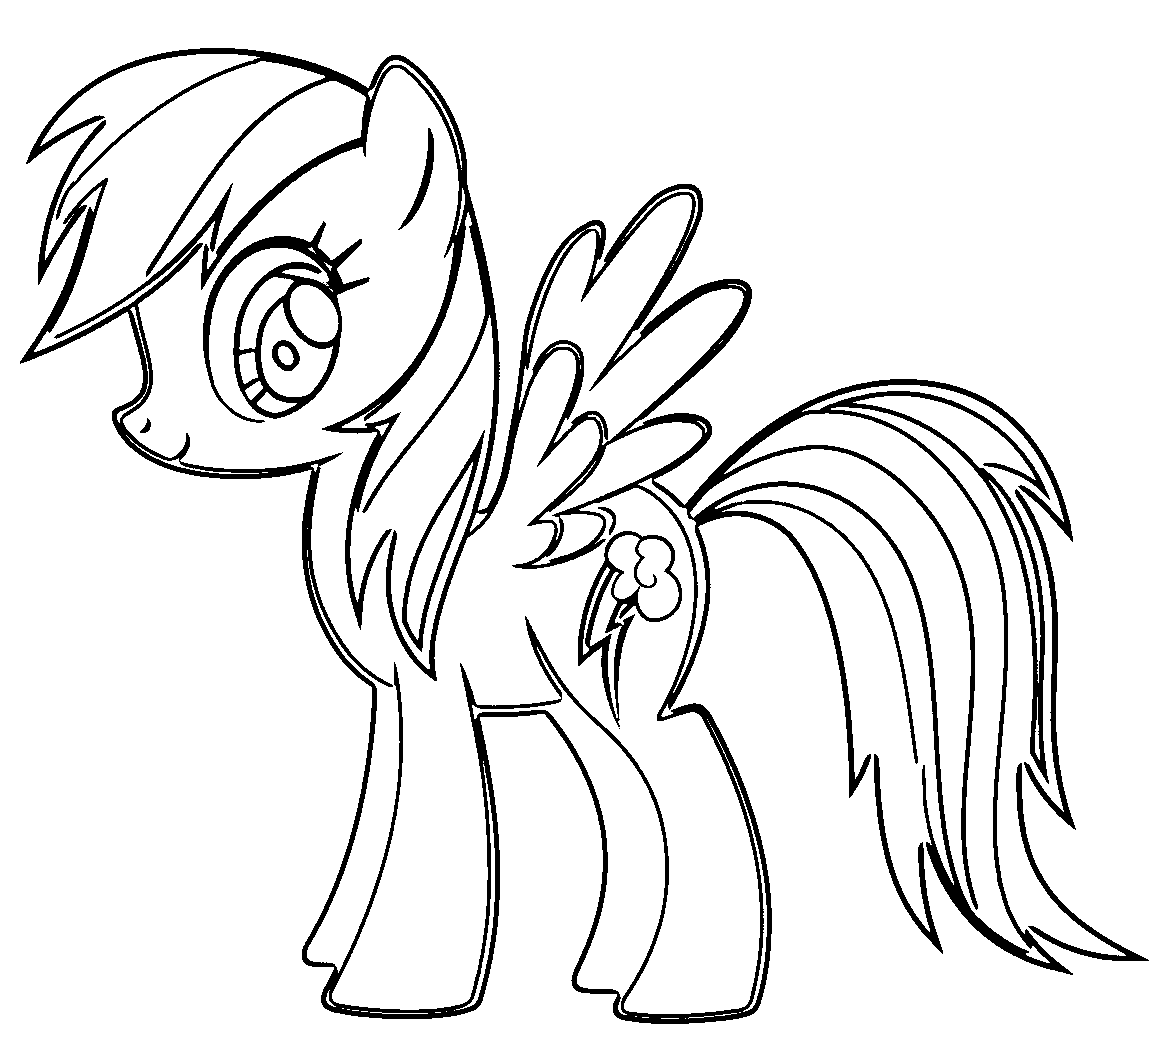 my little pony coloring pages rainbow dash coloriage my little pony väritystehtäviävärityskirjat pony my coloring pages little rainbow dash 